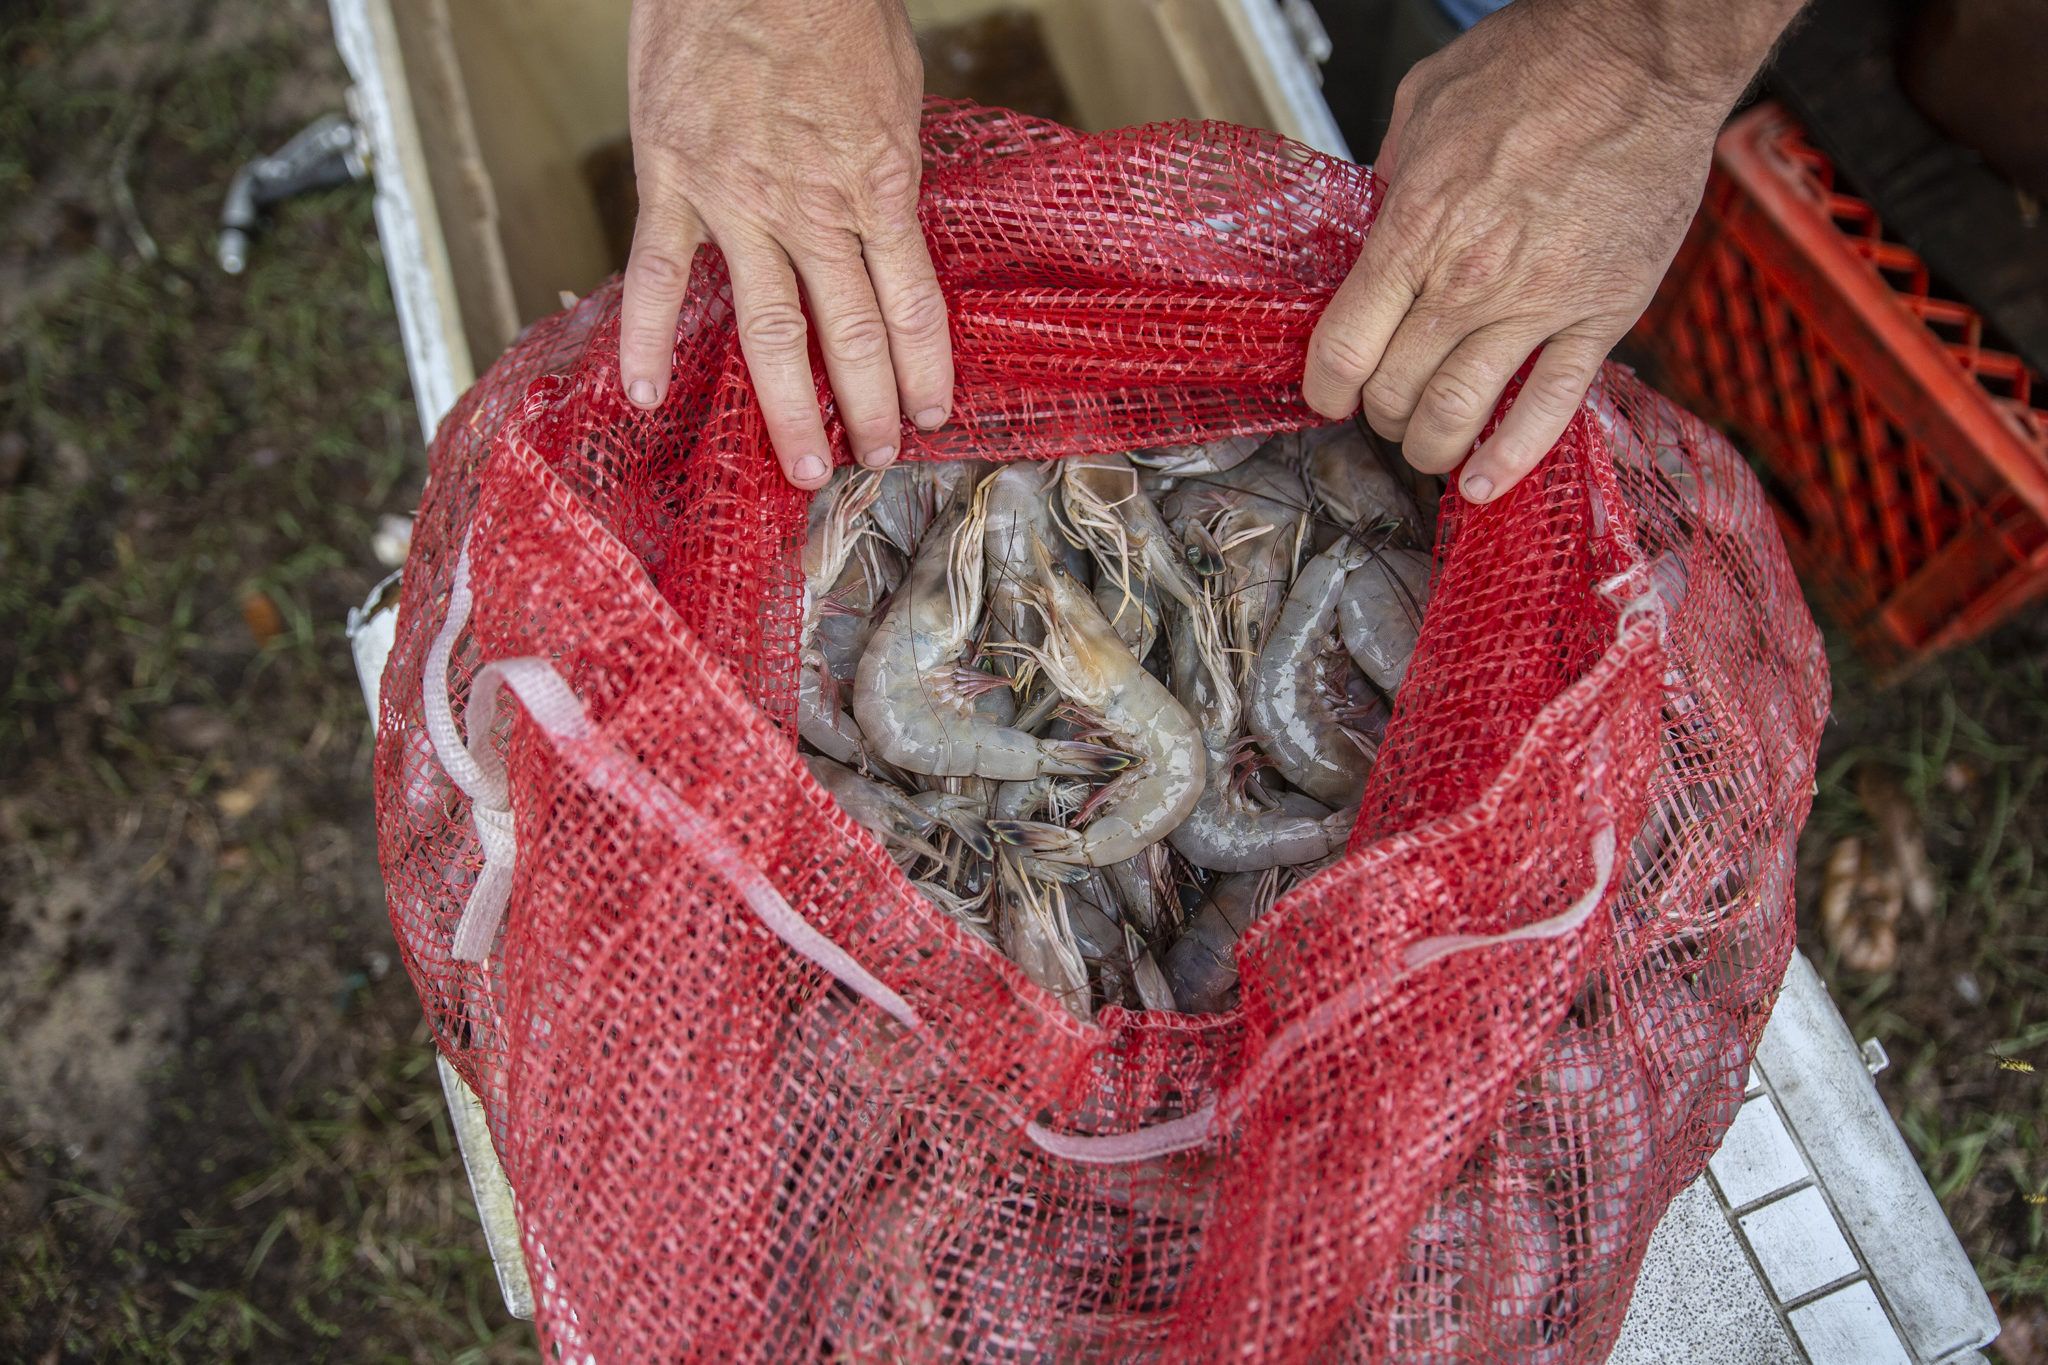 Fisherman Chad Stork showing his shrimp at his home in Lucedale. Image by Eric J. Shelton for Mississippi Today. United States, 2019.